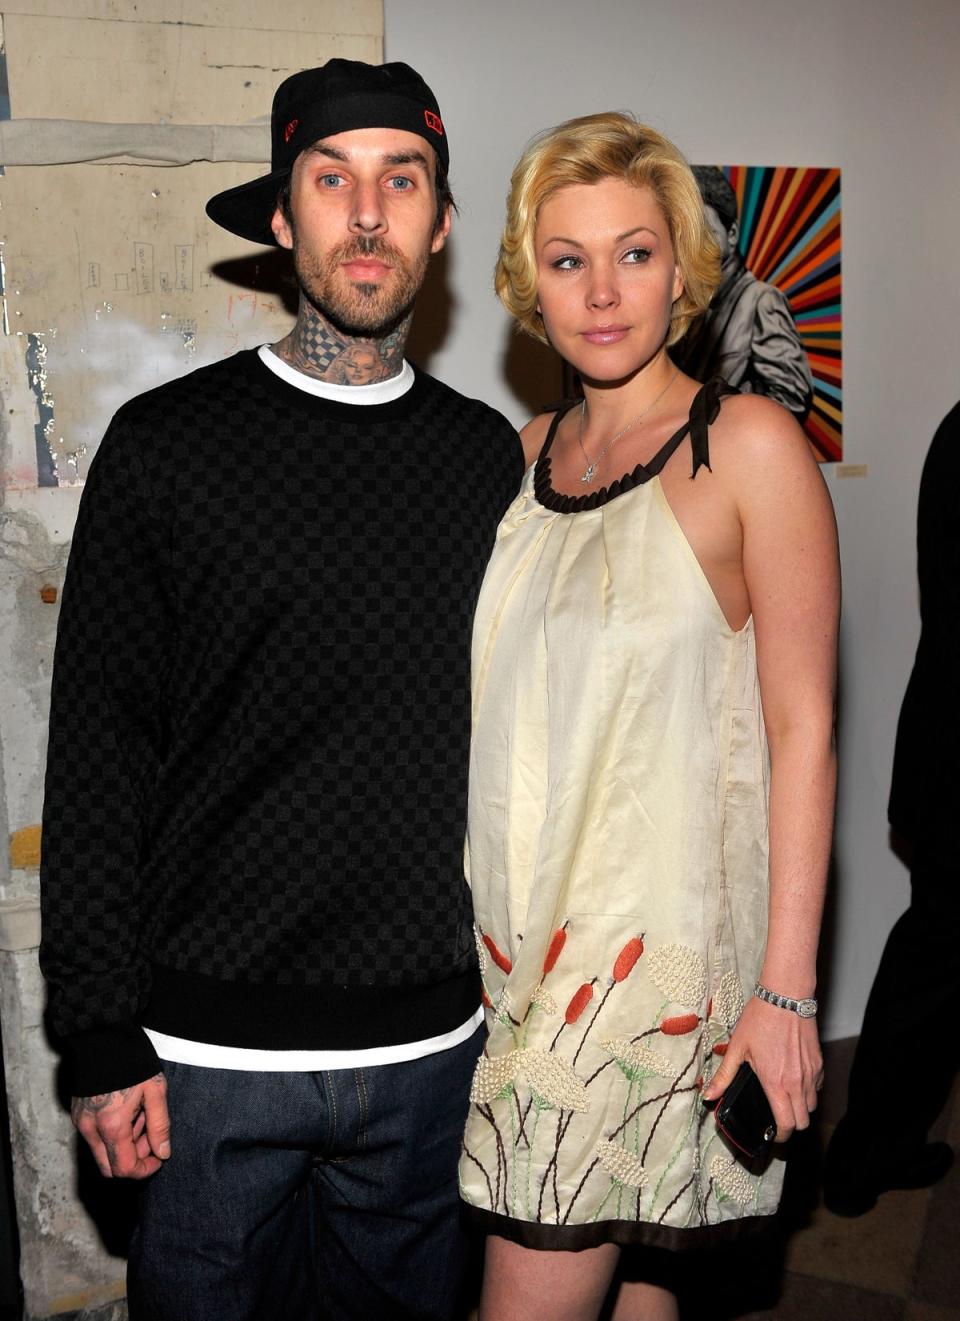 Travis Barker and Shanna Moakler attend the launch of Worlds on Fire: Grammy-Nominated Artist Exhibition at Pacific Electric Lofts on February 2, 2009 (Getty Images)